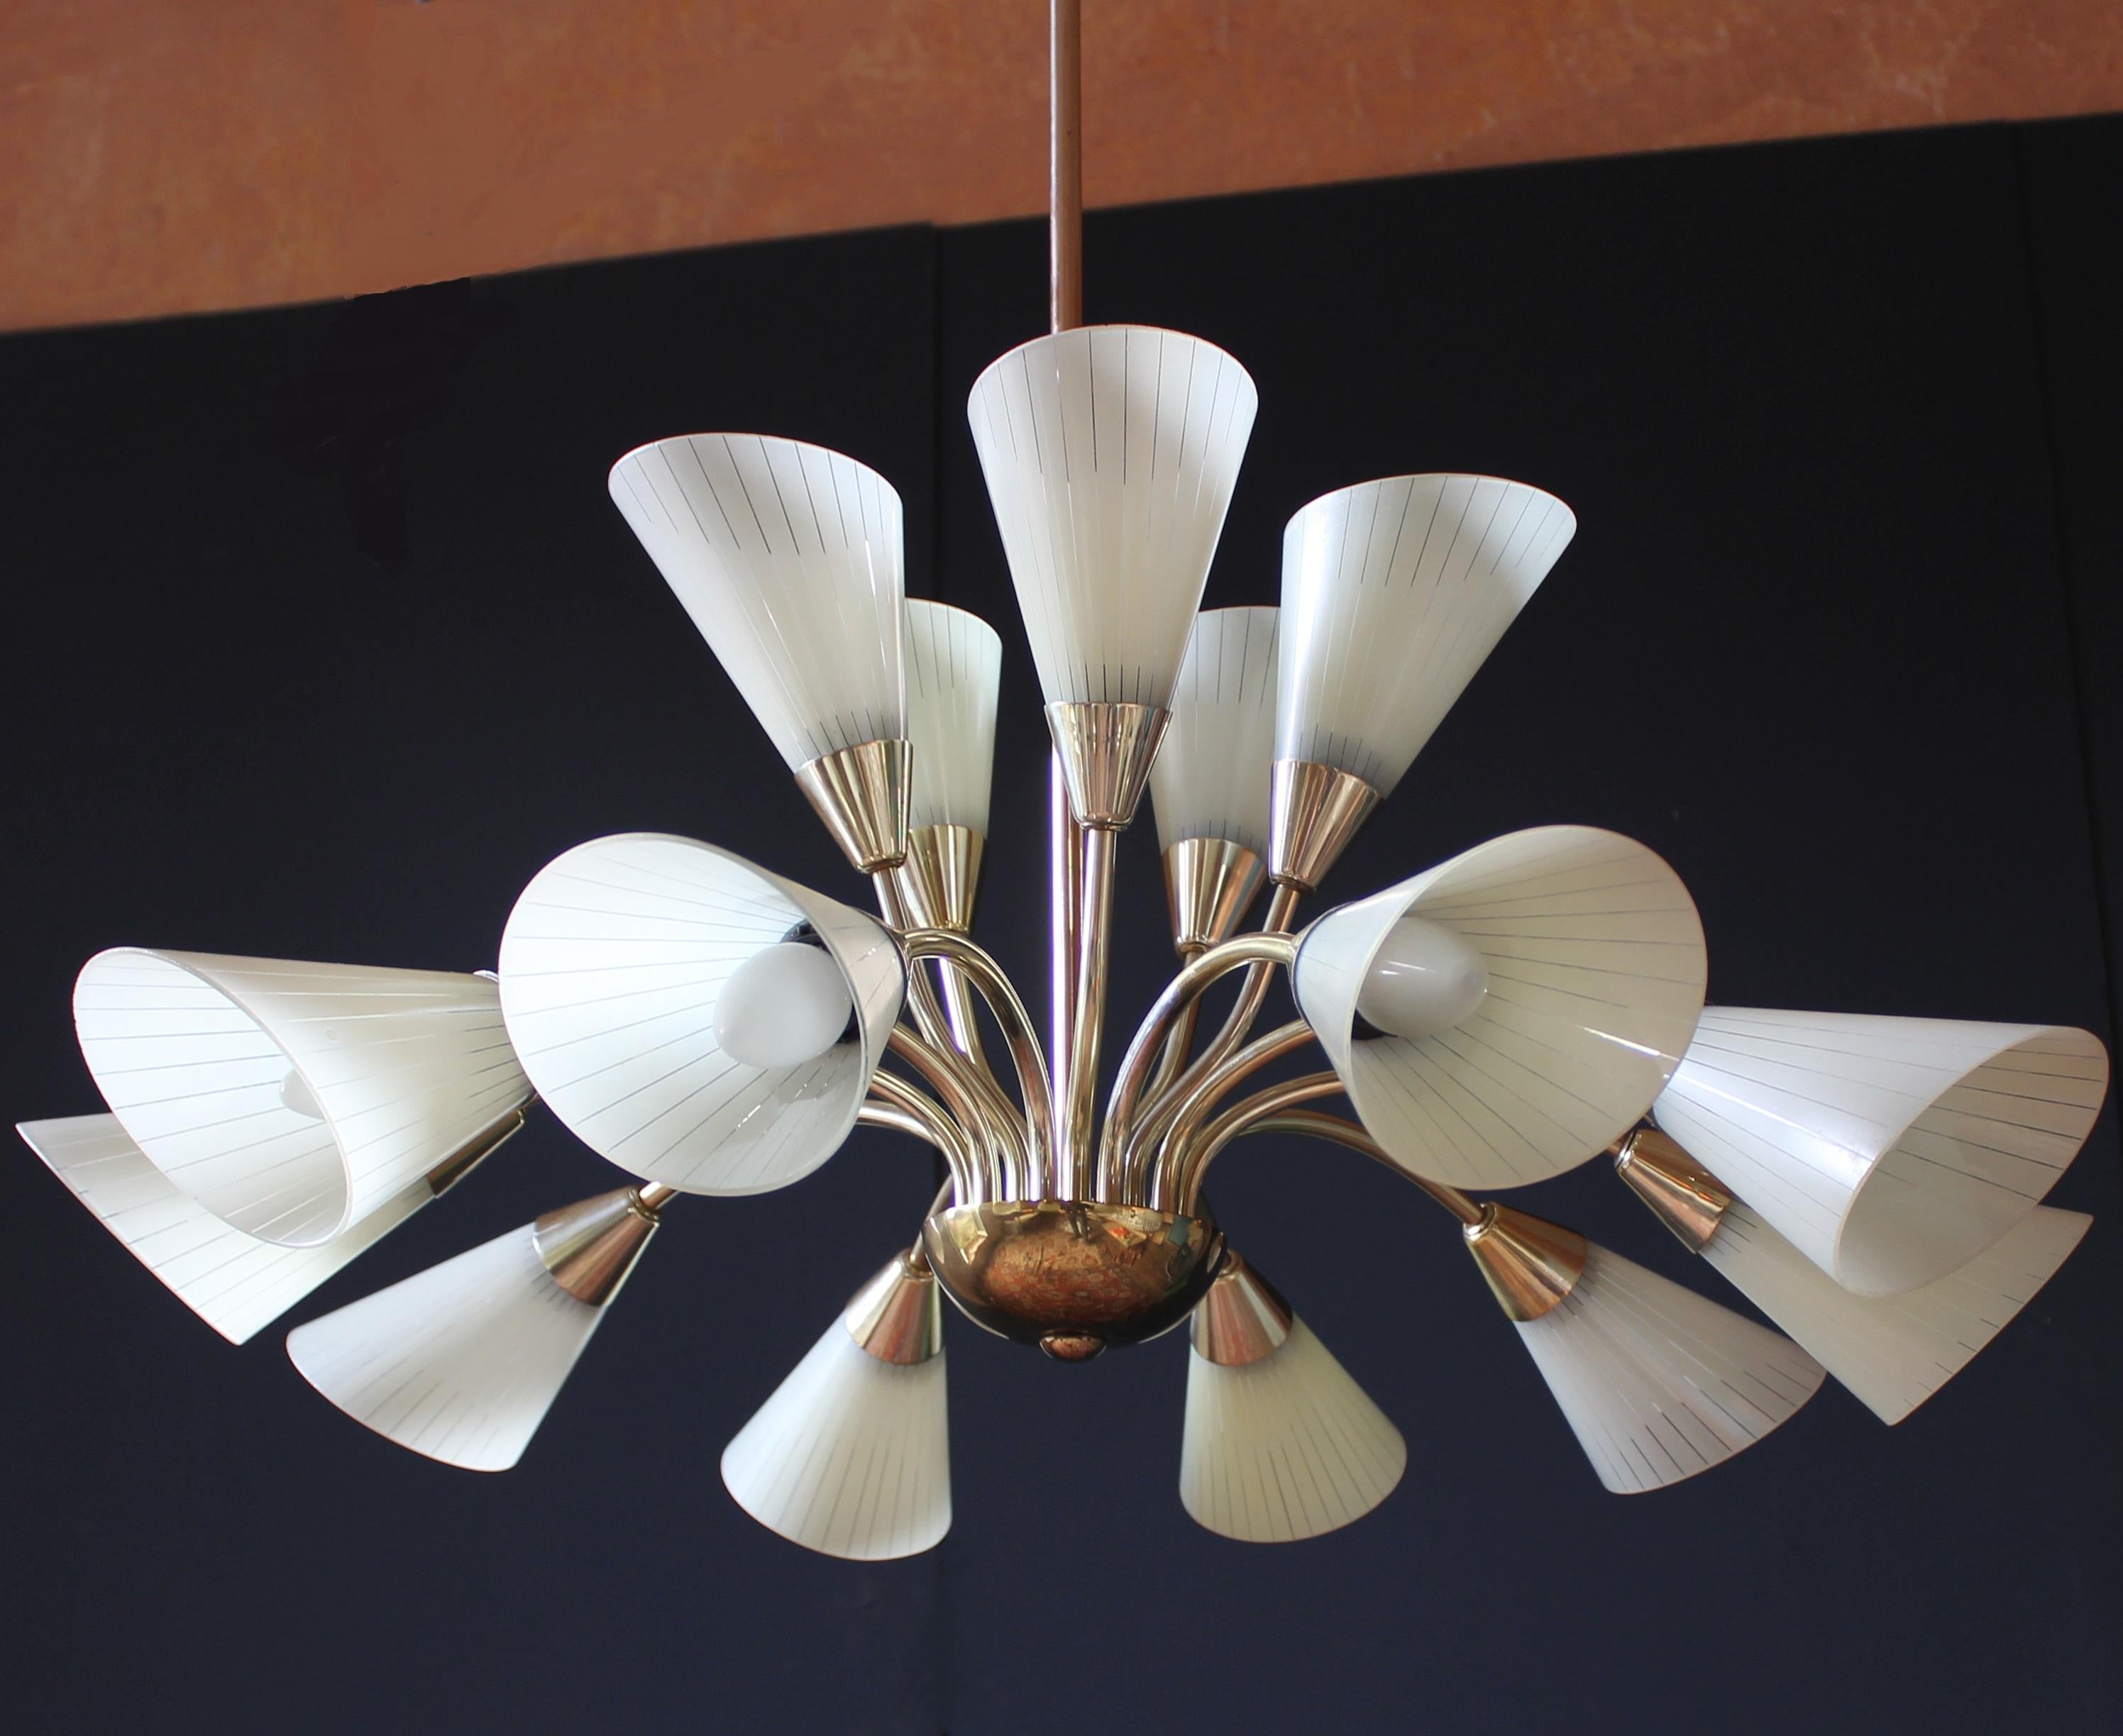 Romantic 1950s butterfly chandelier / Germany with 15-light
Brass and fine enameled glass tulip shades

This fine chandelier is a timeless and elegant masterpiece of midcentury German Furniture Design. The light sculpture impresses as a romantic